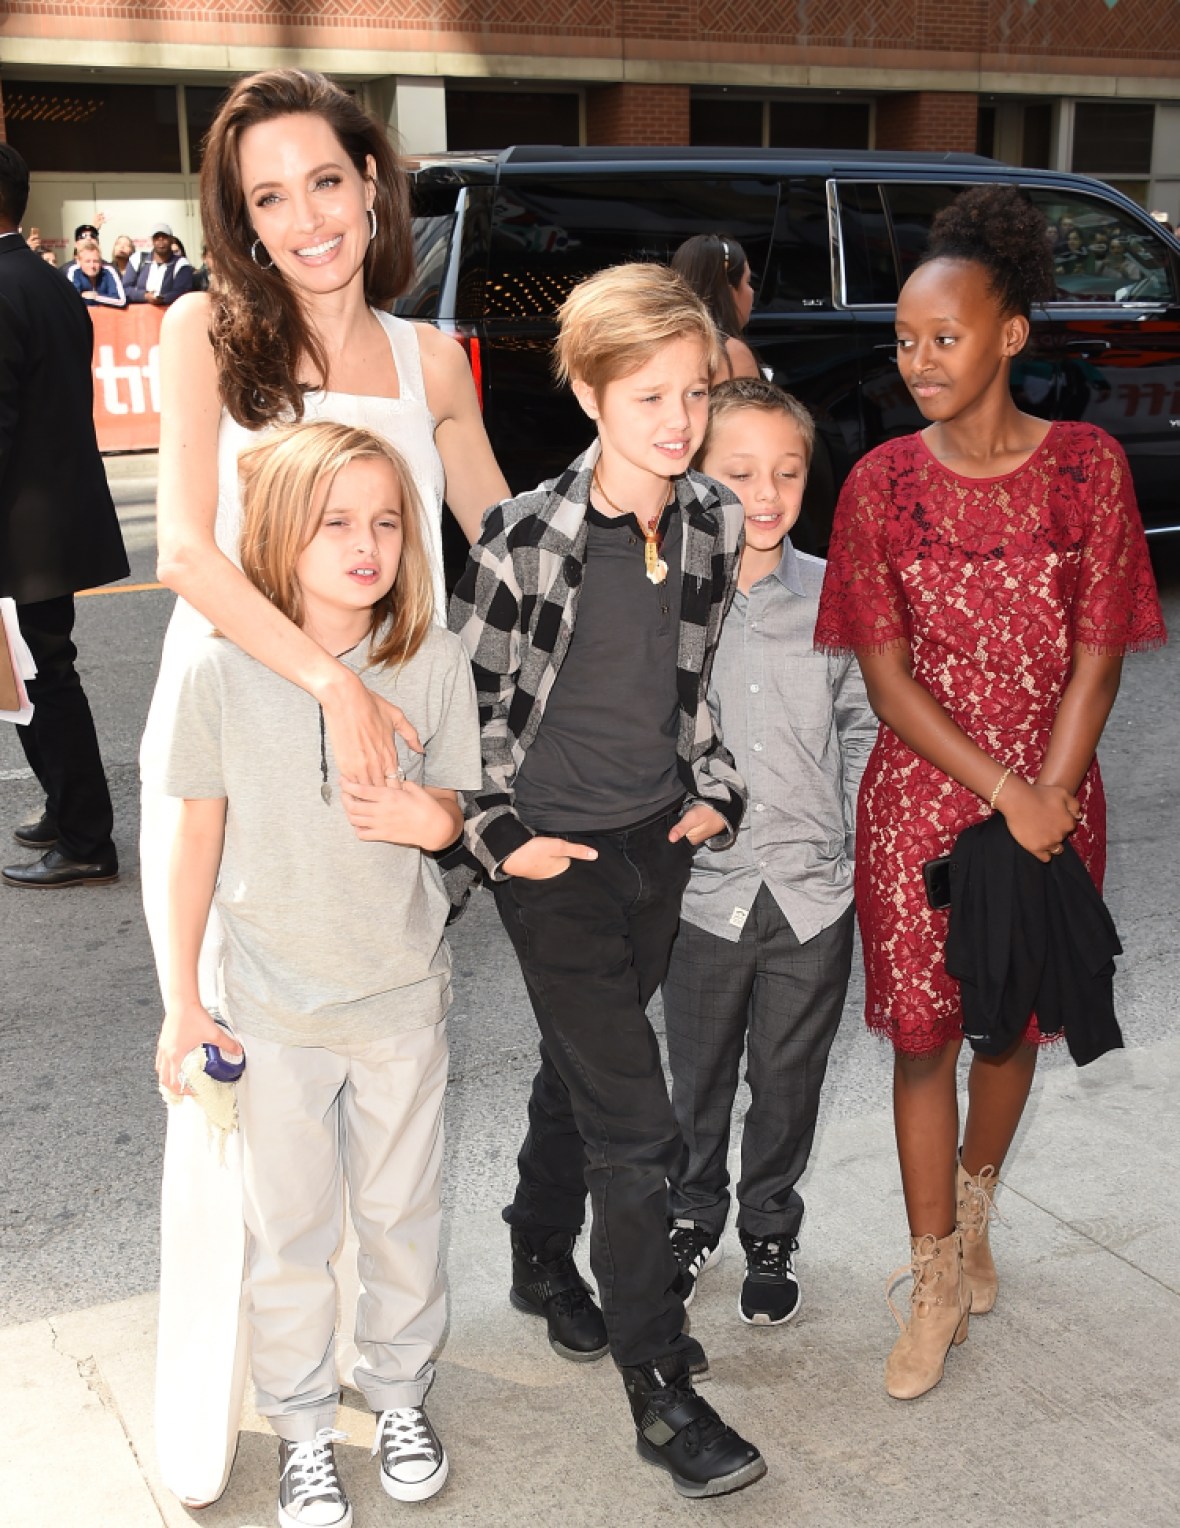 Shiloh Jolie-Pitt Now: Brad and Angelina's Child Is All Grown Up